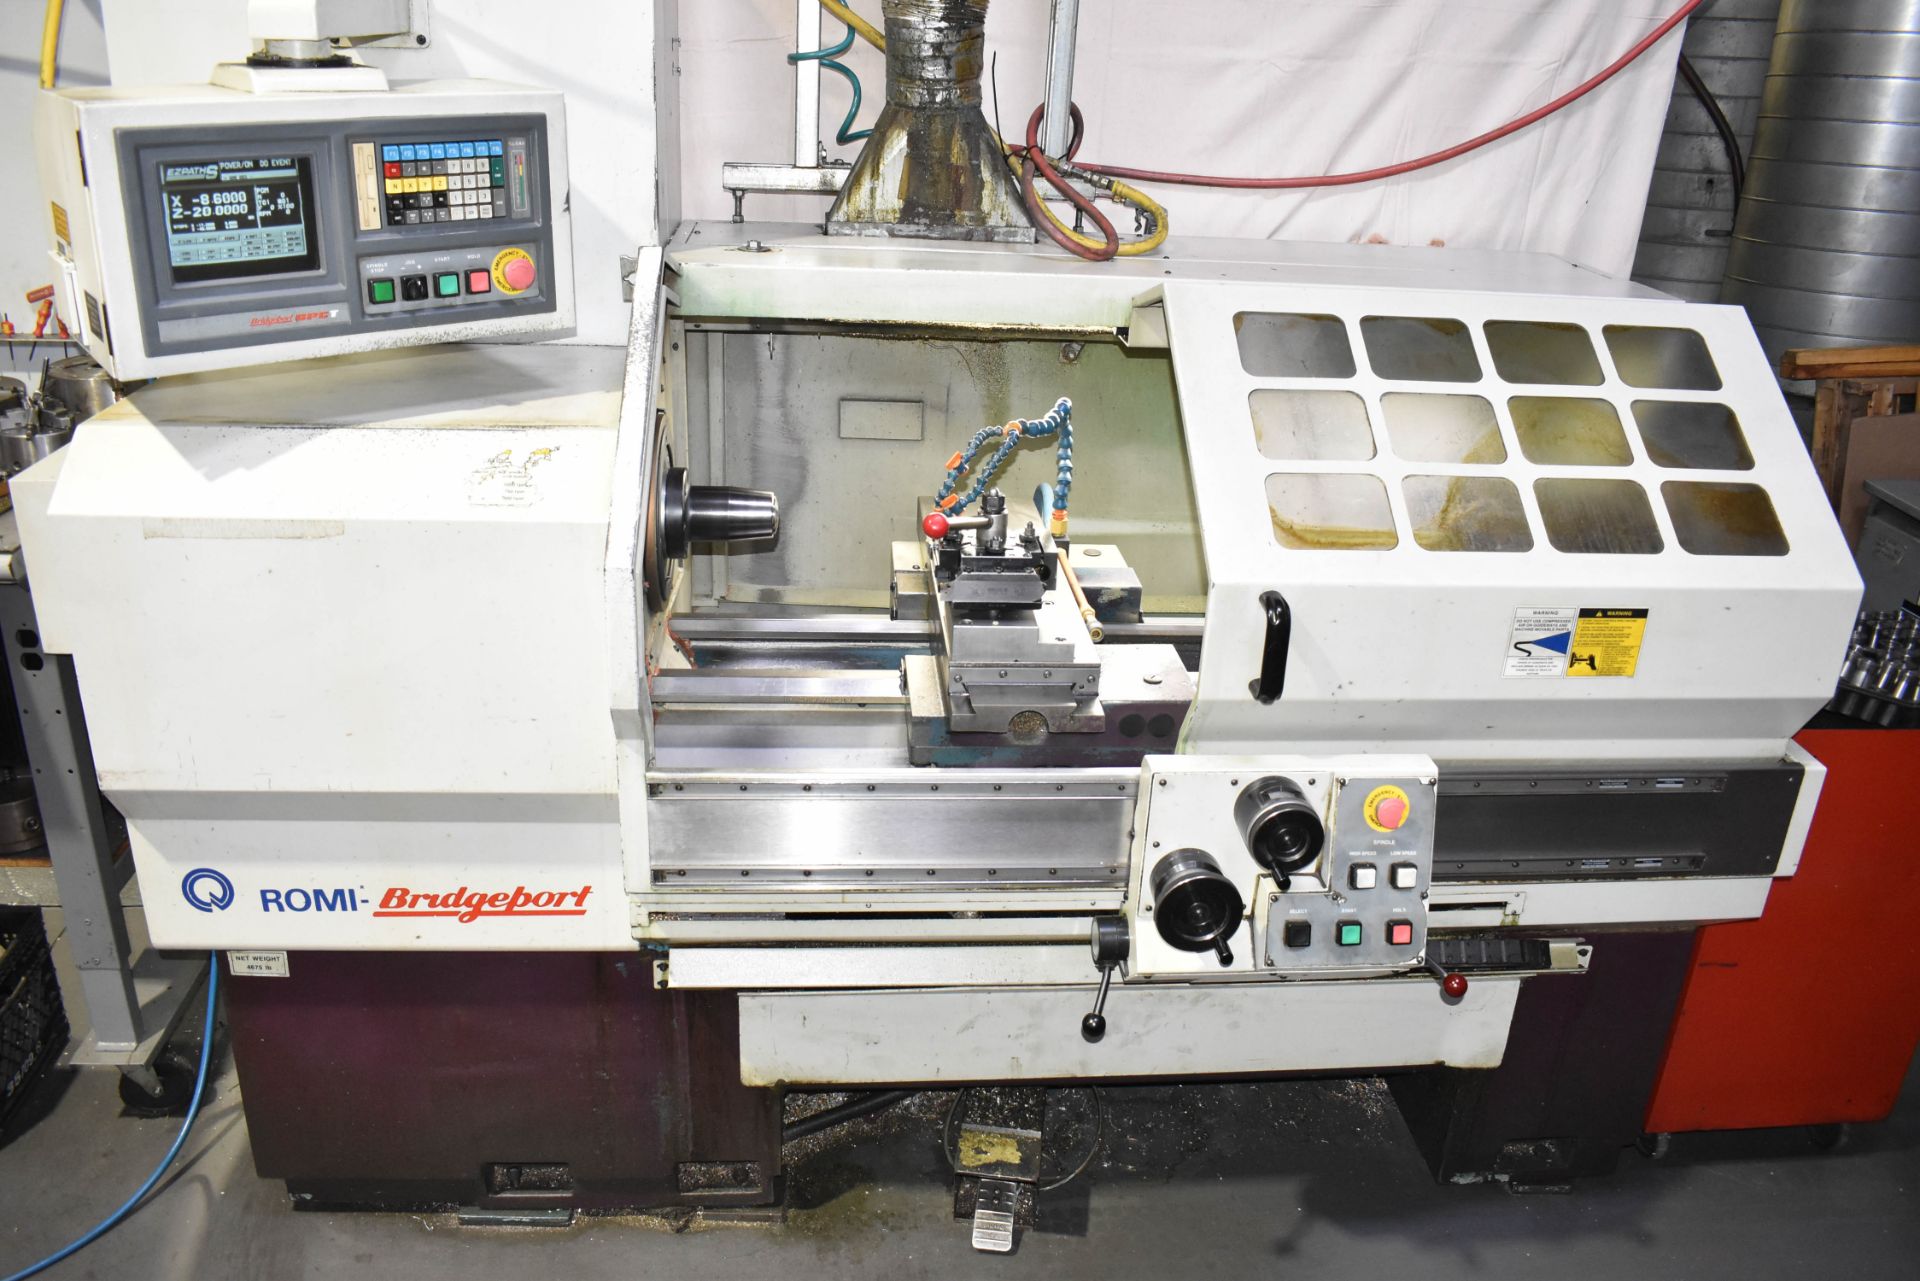 BRIDGEPORT EZ-PATH SD CNC LATHE WITH 40" DISTANCE BETWEEN CENTERS, 17" SWING OVER BED, 8" SWING OVER